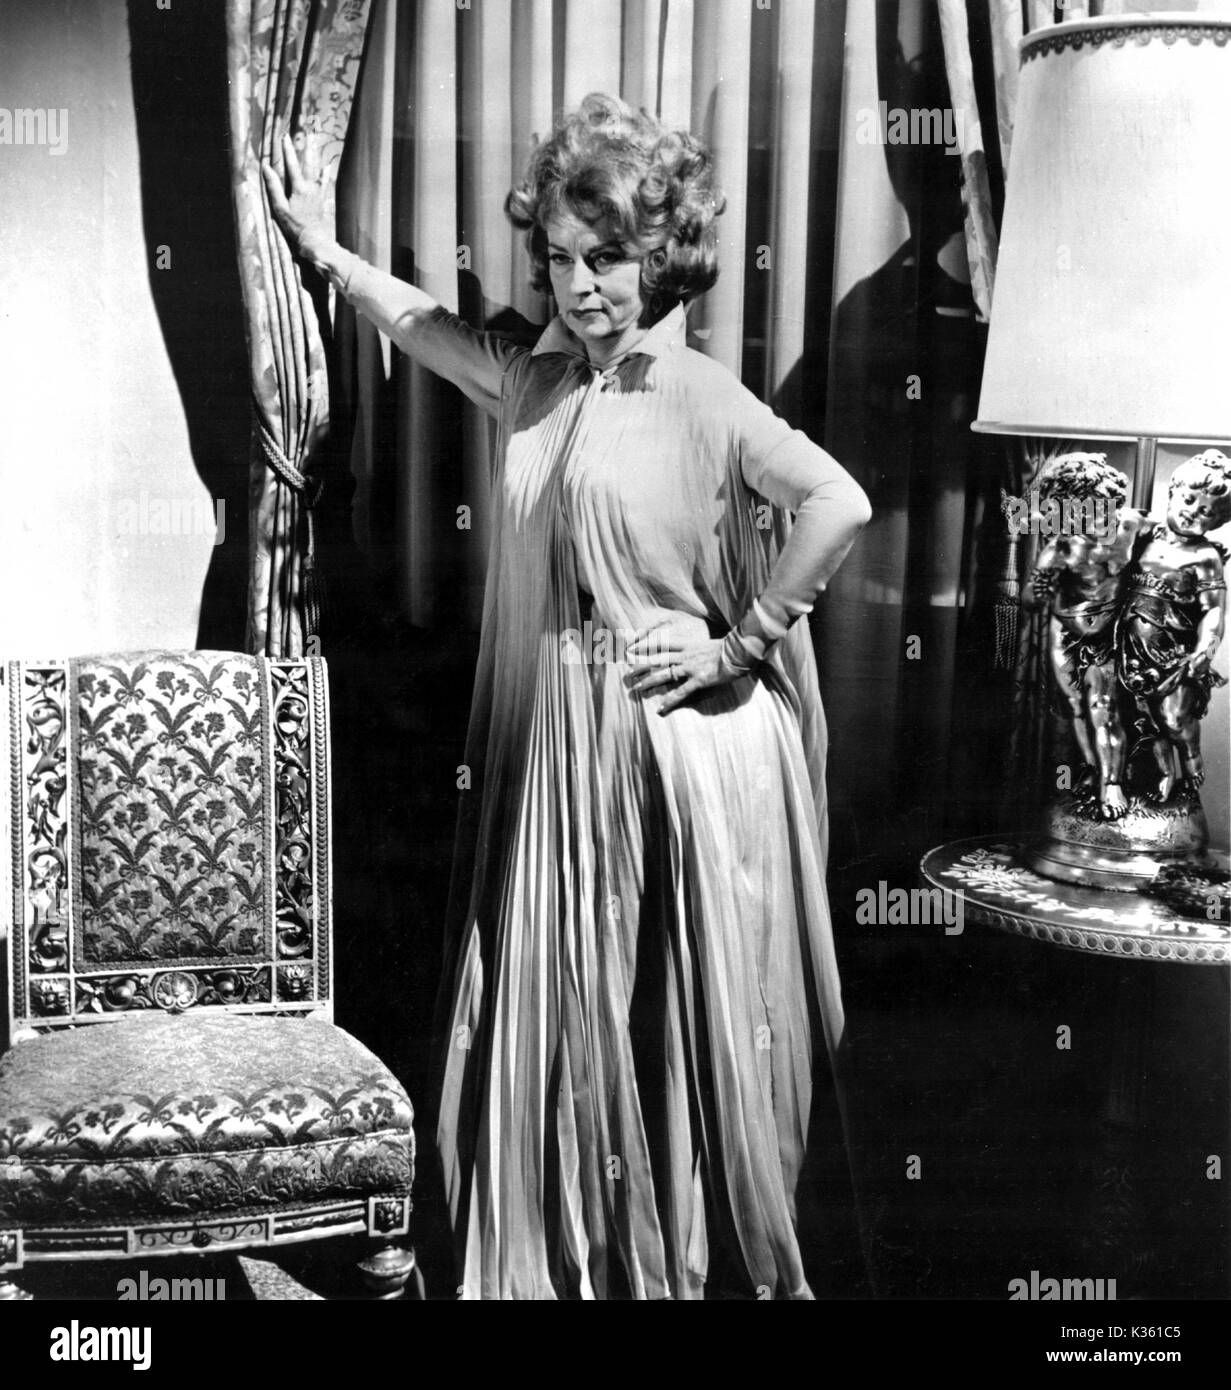 bewitched endora